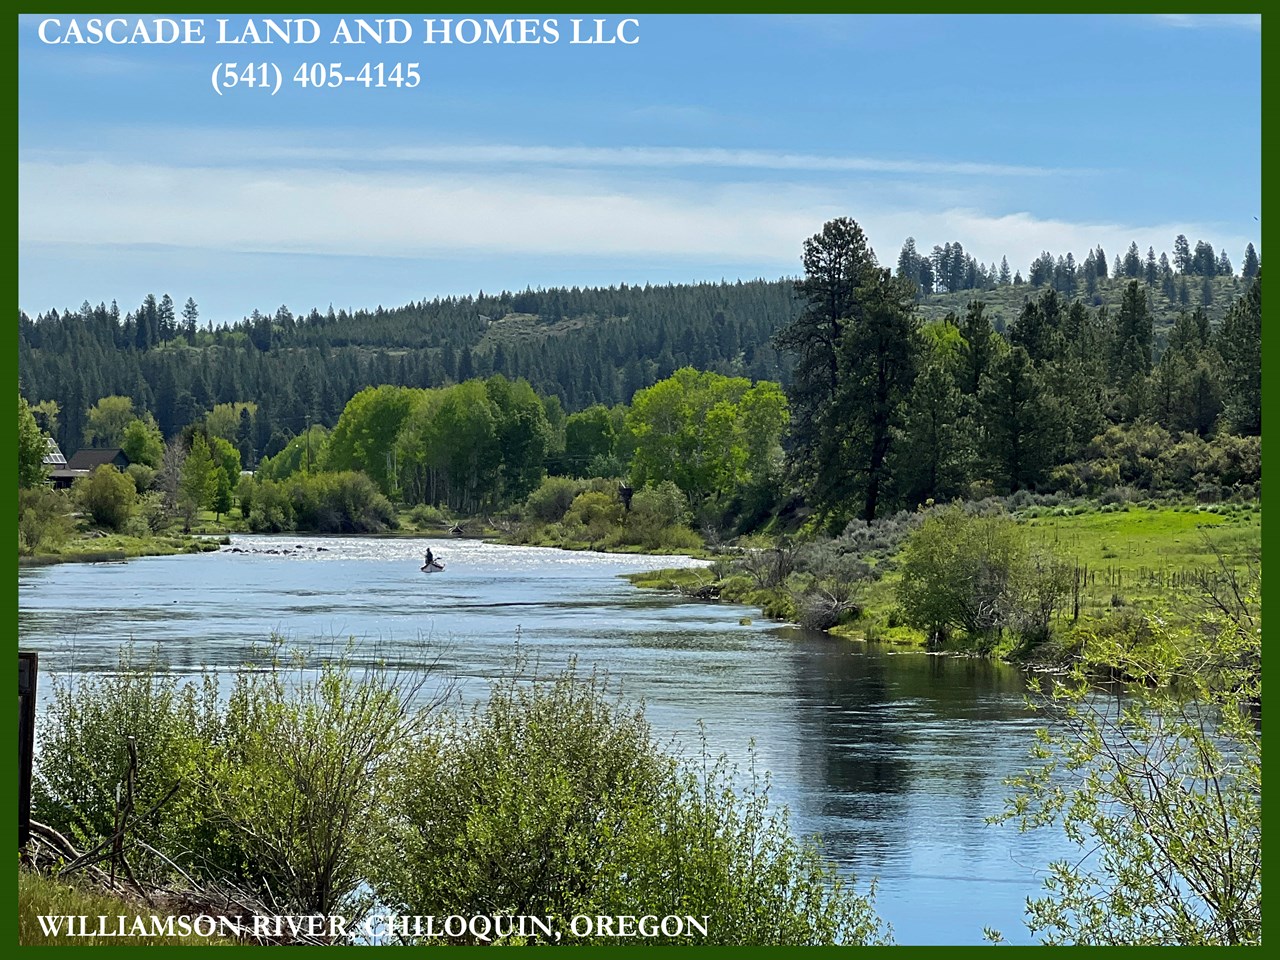 this photo of the williamson river was taken from the boat launching park in the town of chiloquin that is about 10 minutes from the property. they have a few stores in town and a volunteer fire and ambulance service. klamath falls is about 30 minutes away for larger city amenities.